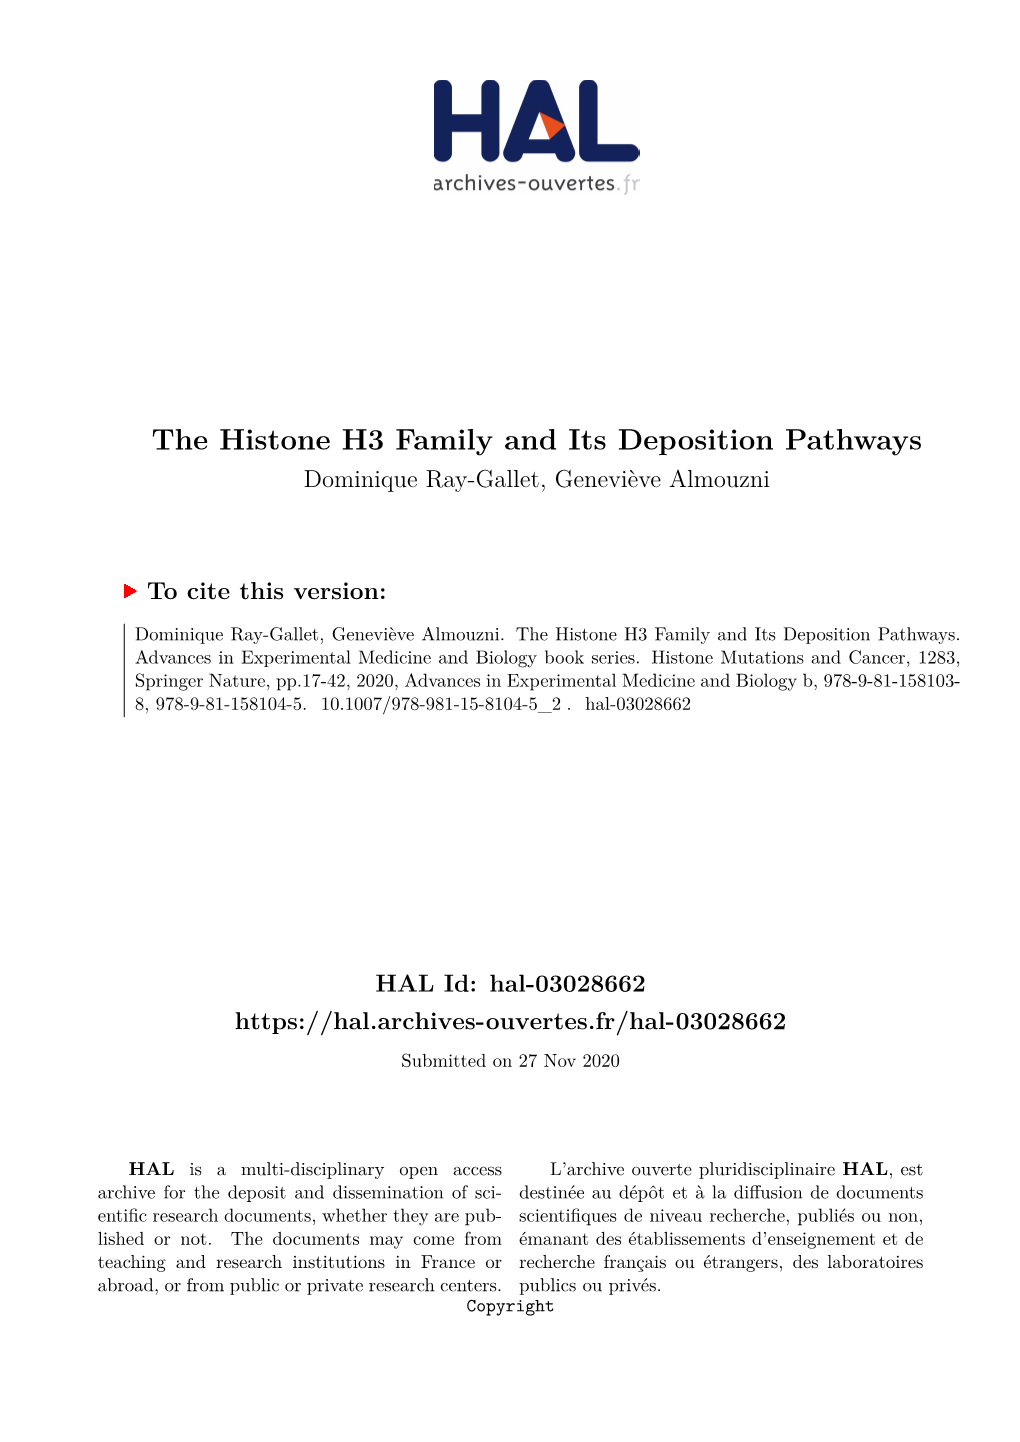 The Histone H3 Family and Its Deposition Pathways Dominique Ray-Gallet, Geneviève Almouzni